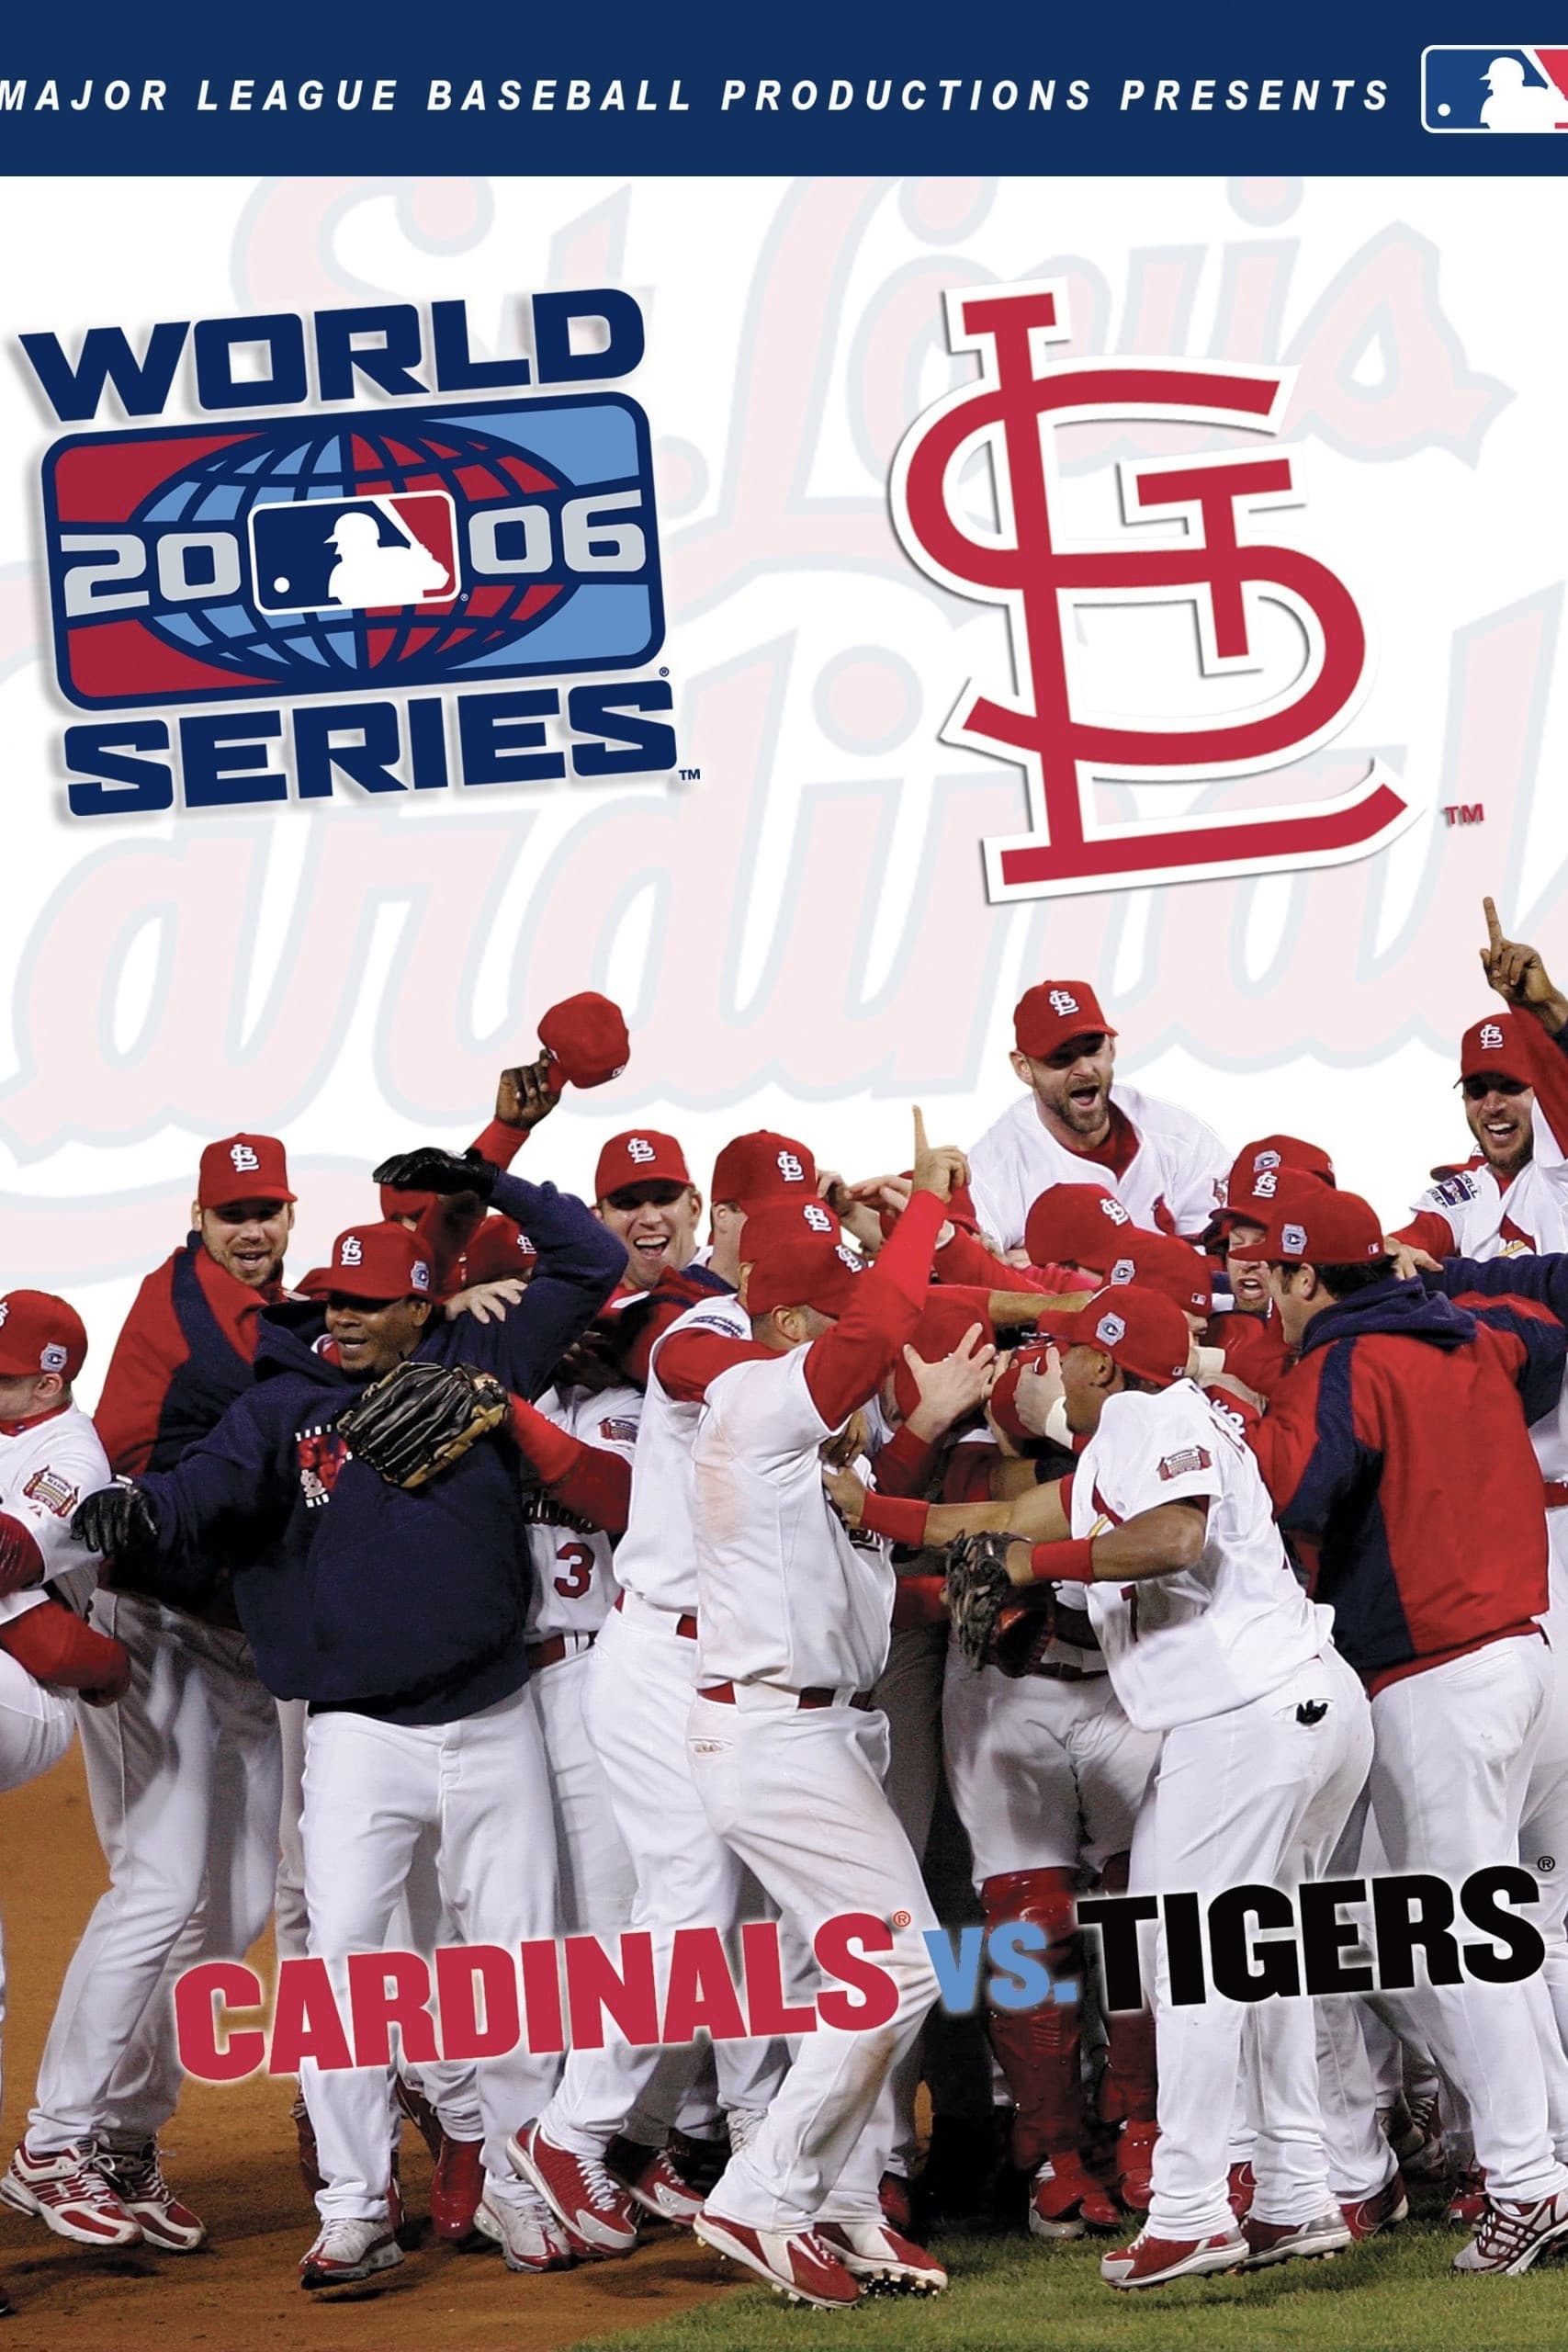 2006 St. Louis Cardinals: The Official World Series Film